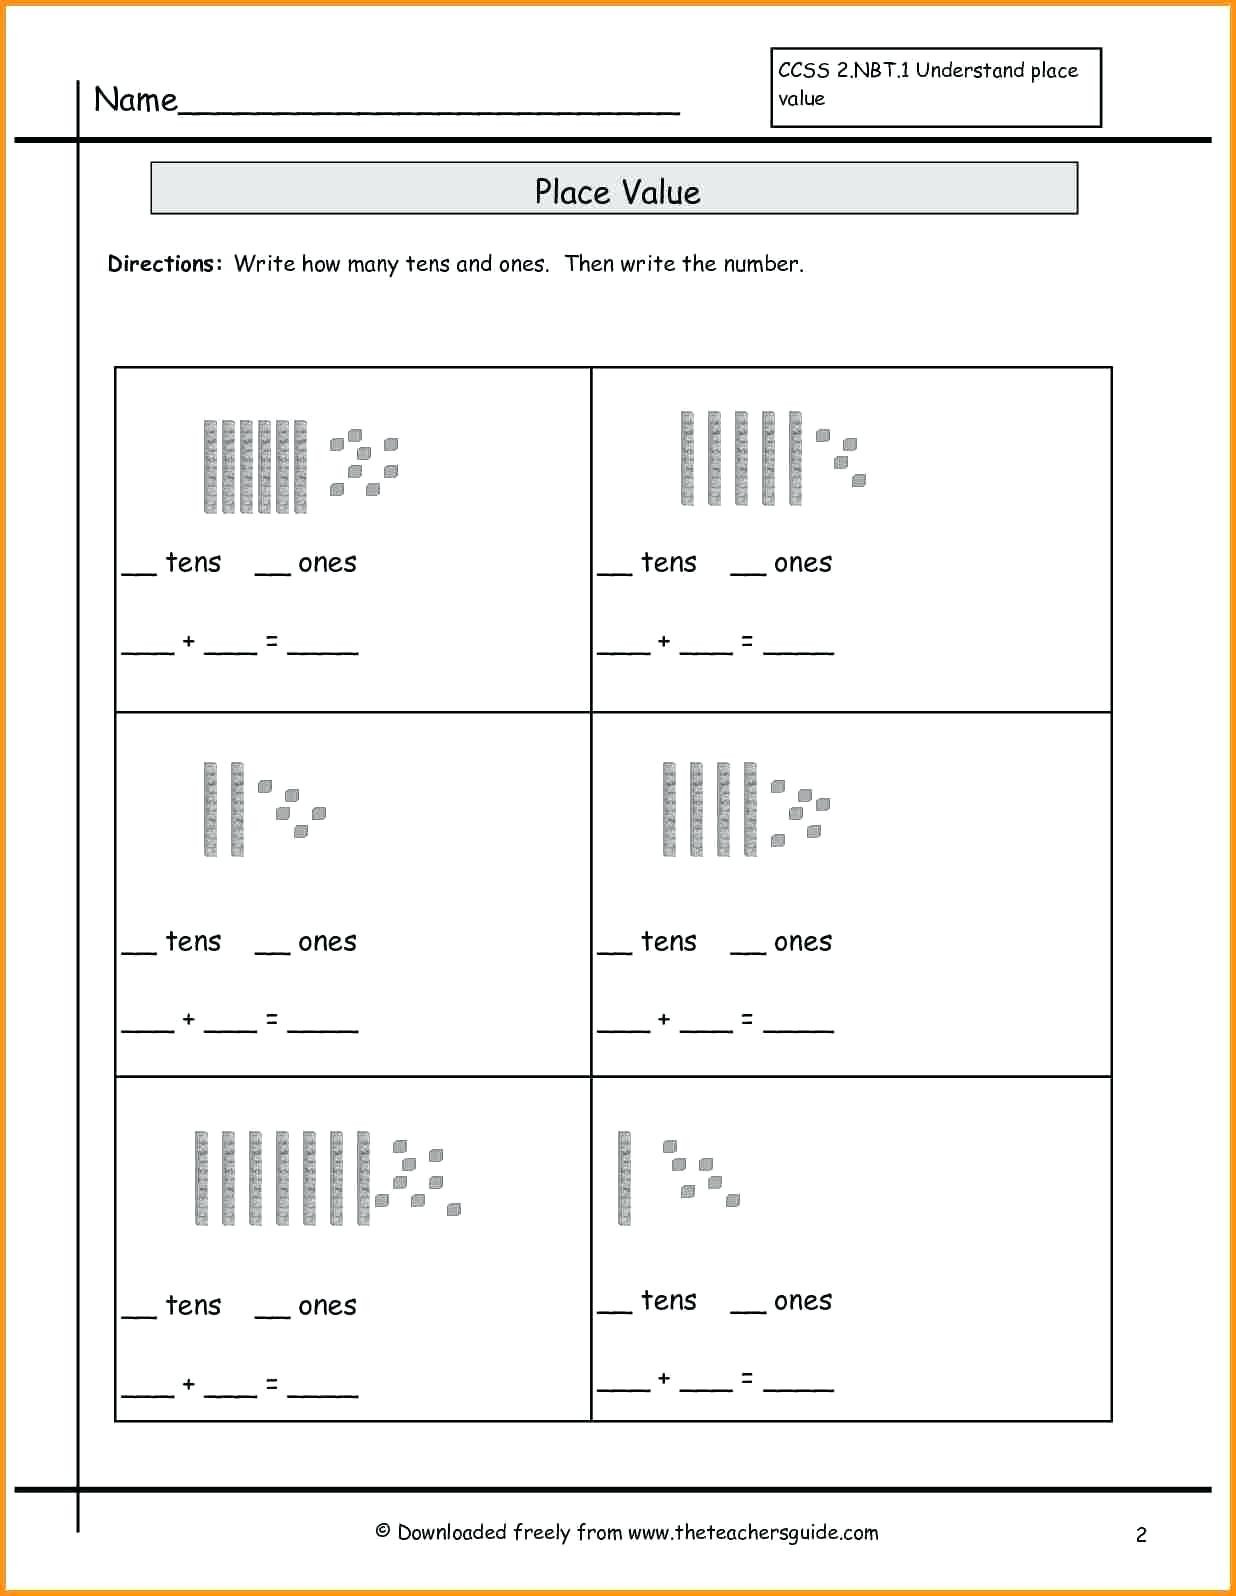 Free Math Worksheets Second Grade 2 Subtraction Subtracting 1 Digit From 3 Digit Missing Number